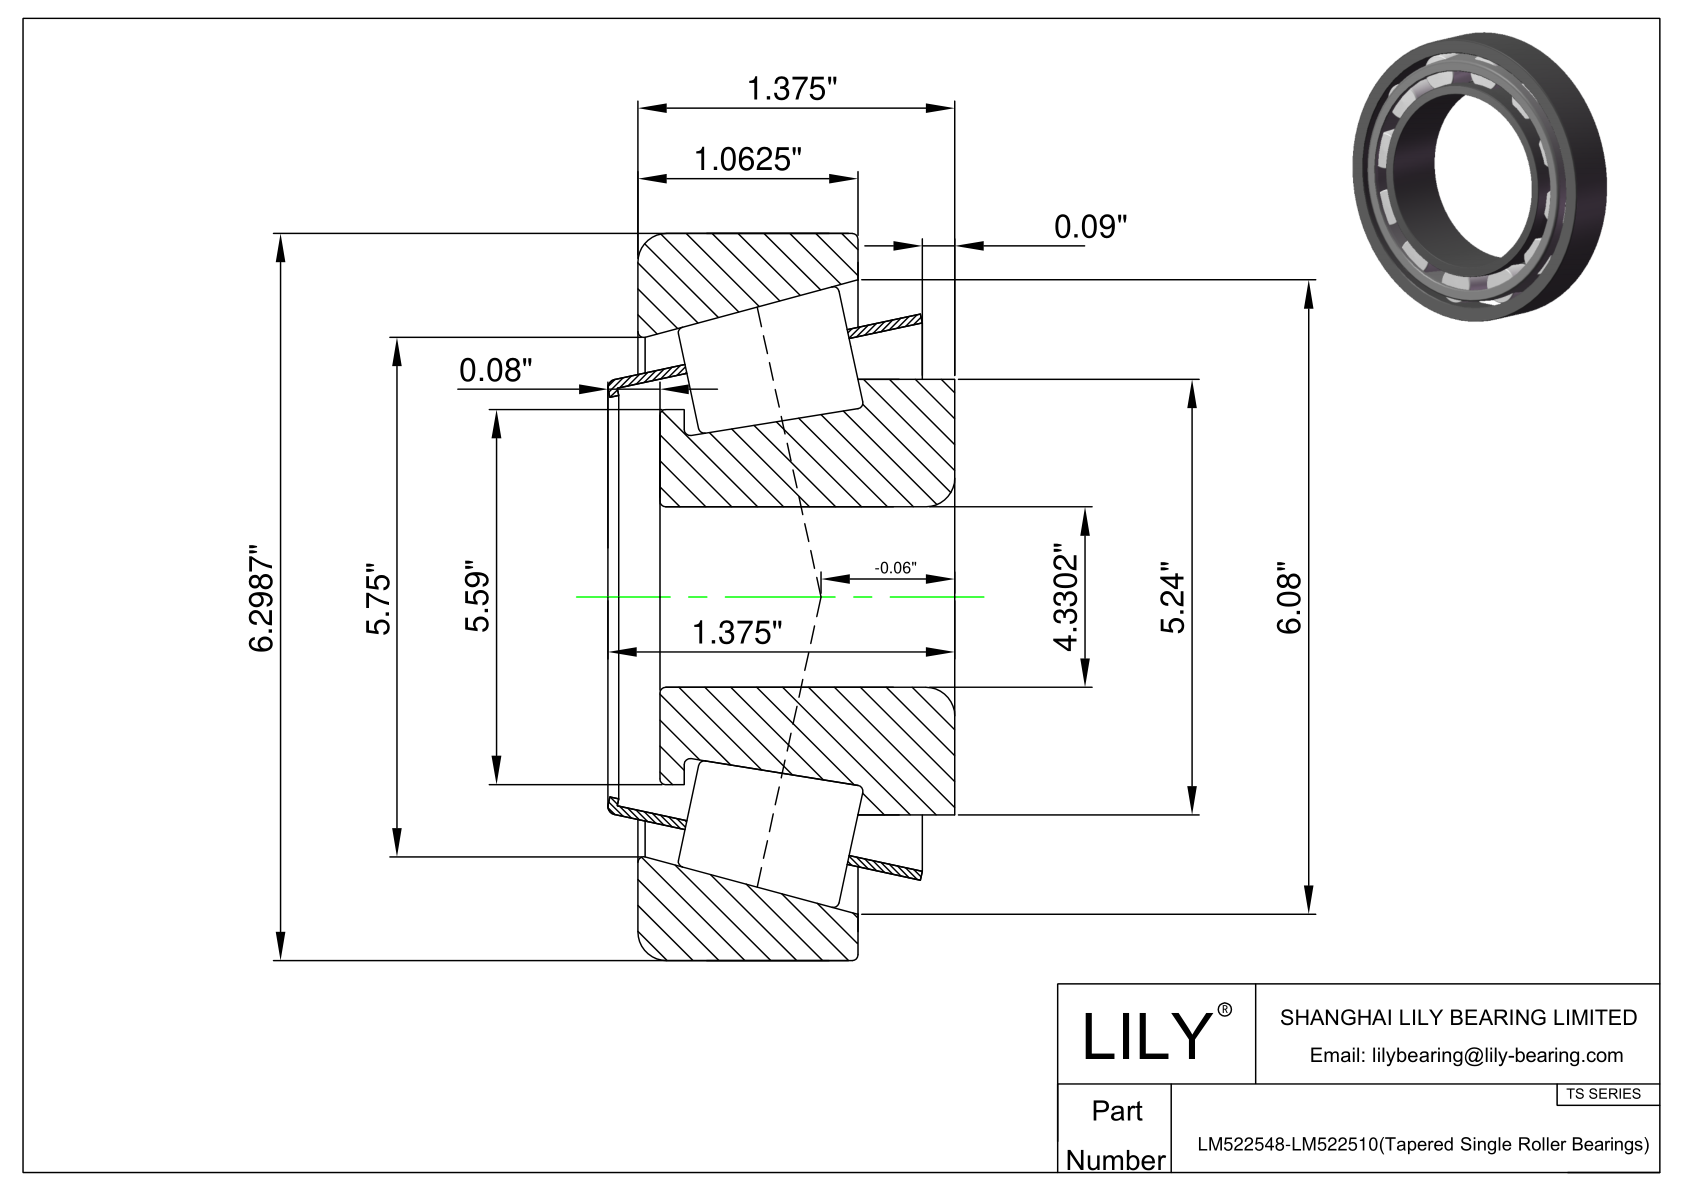 LM522548-LM522510 TS (Tapered Single Roller Bearings) (Imperial) cad drawing